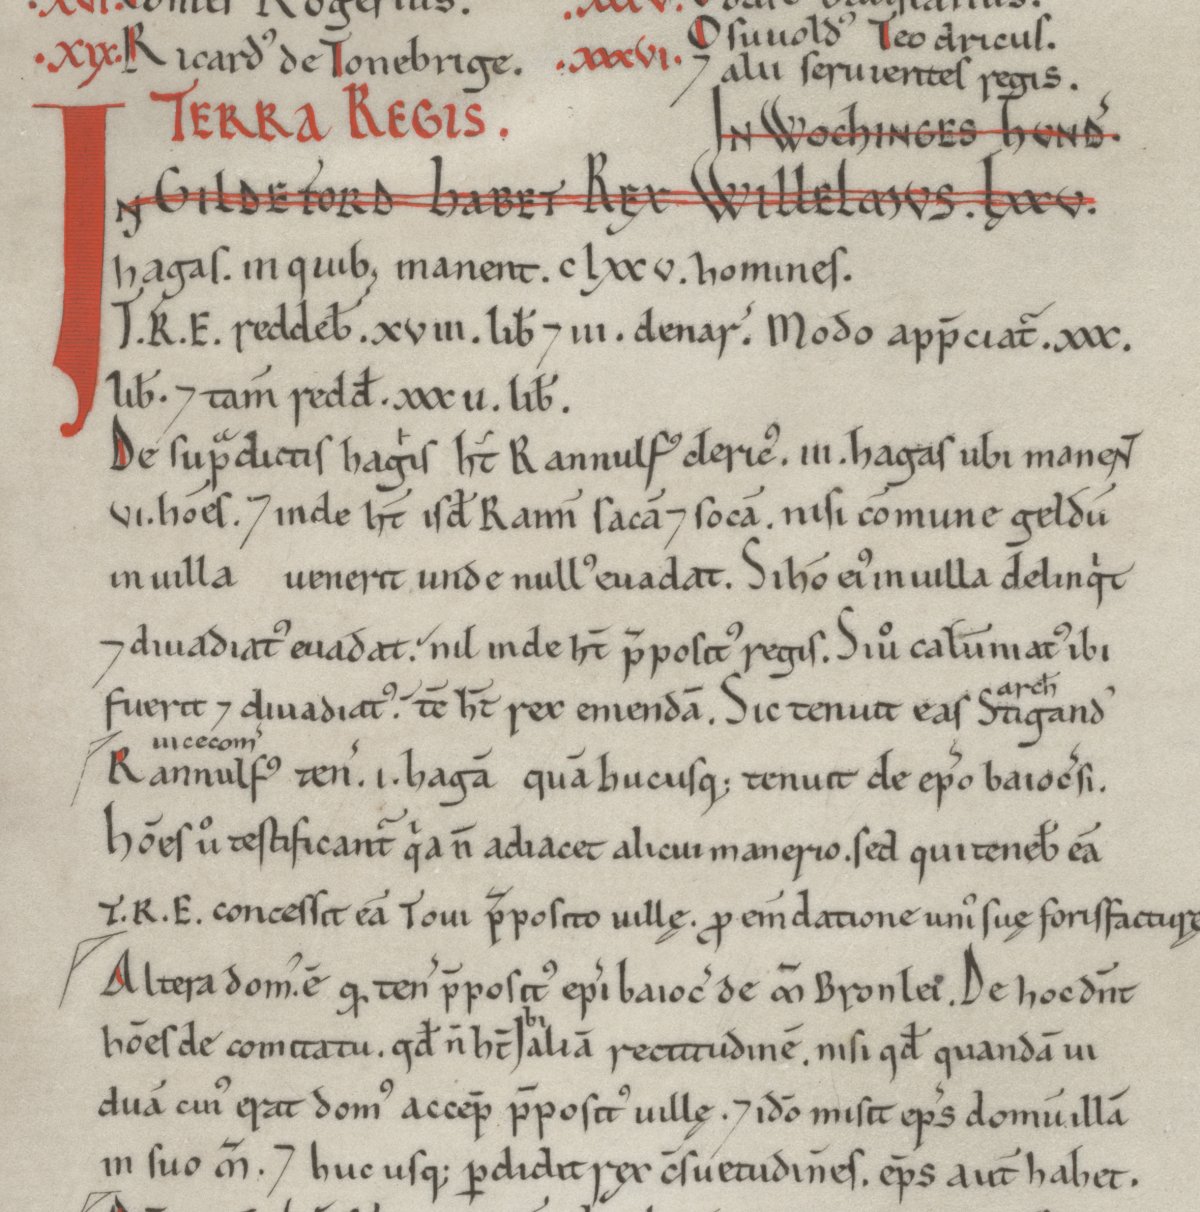 Inset from the Domesday Book. Most text is written in black ink. Some is in red. The words "Terra Regis" is written prominantly in red. The document is written in Latin and lists land owned in the county of Surrey